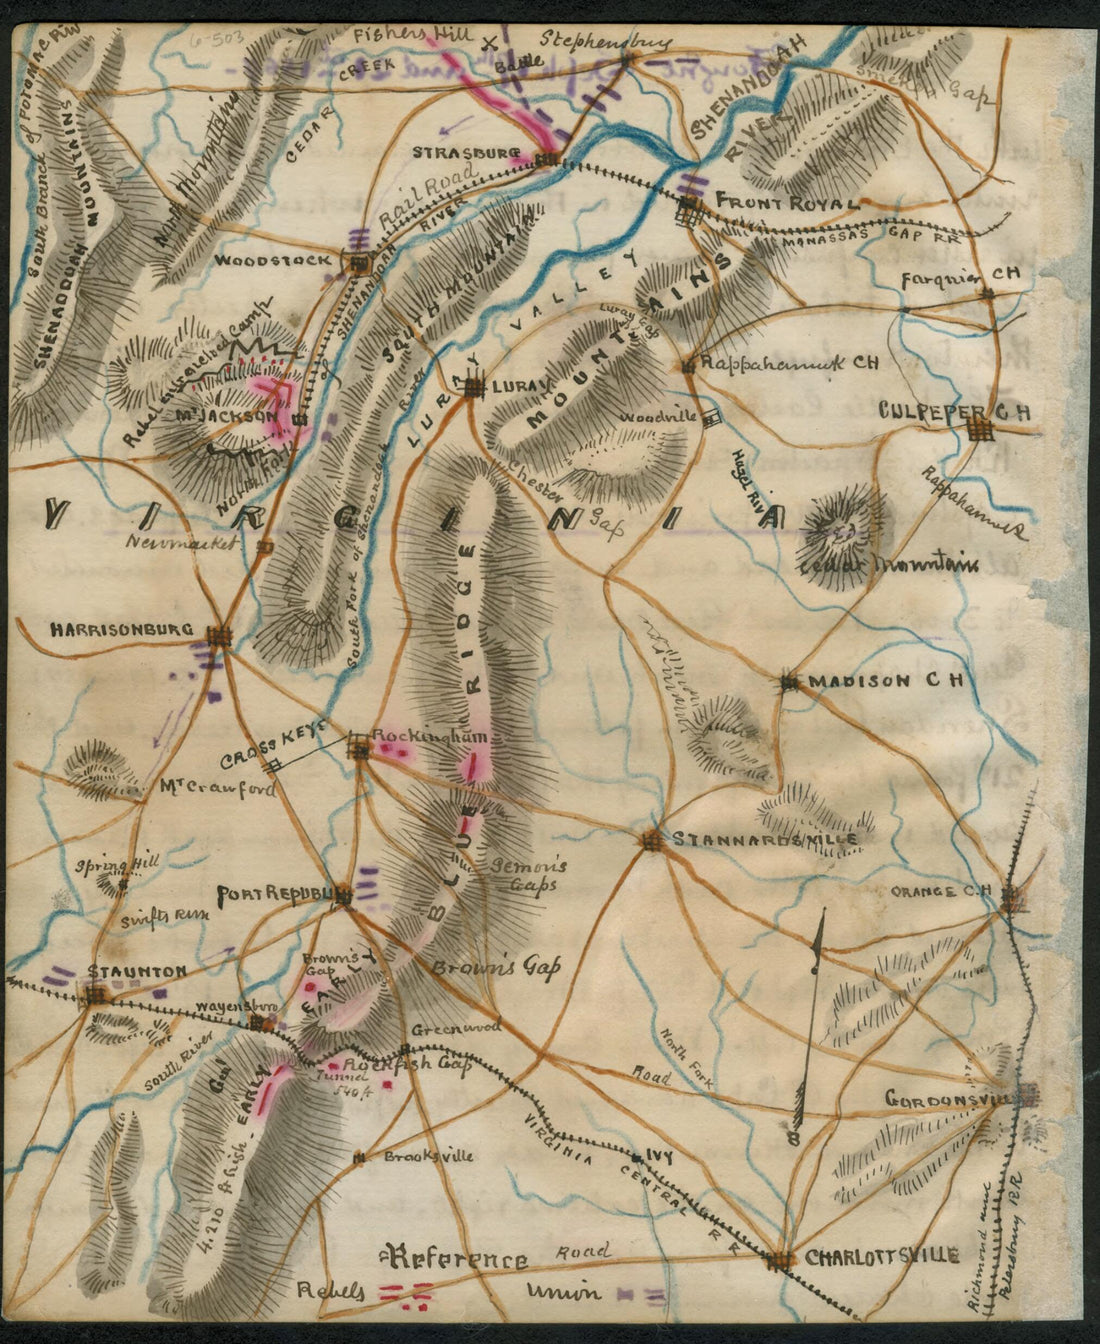 This old map of Map of the Shenandoah Valley Campaign, from 1864 was created by Robert Knox Sneden in 1864